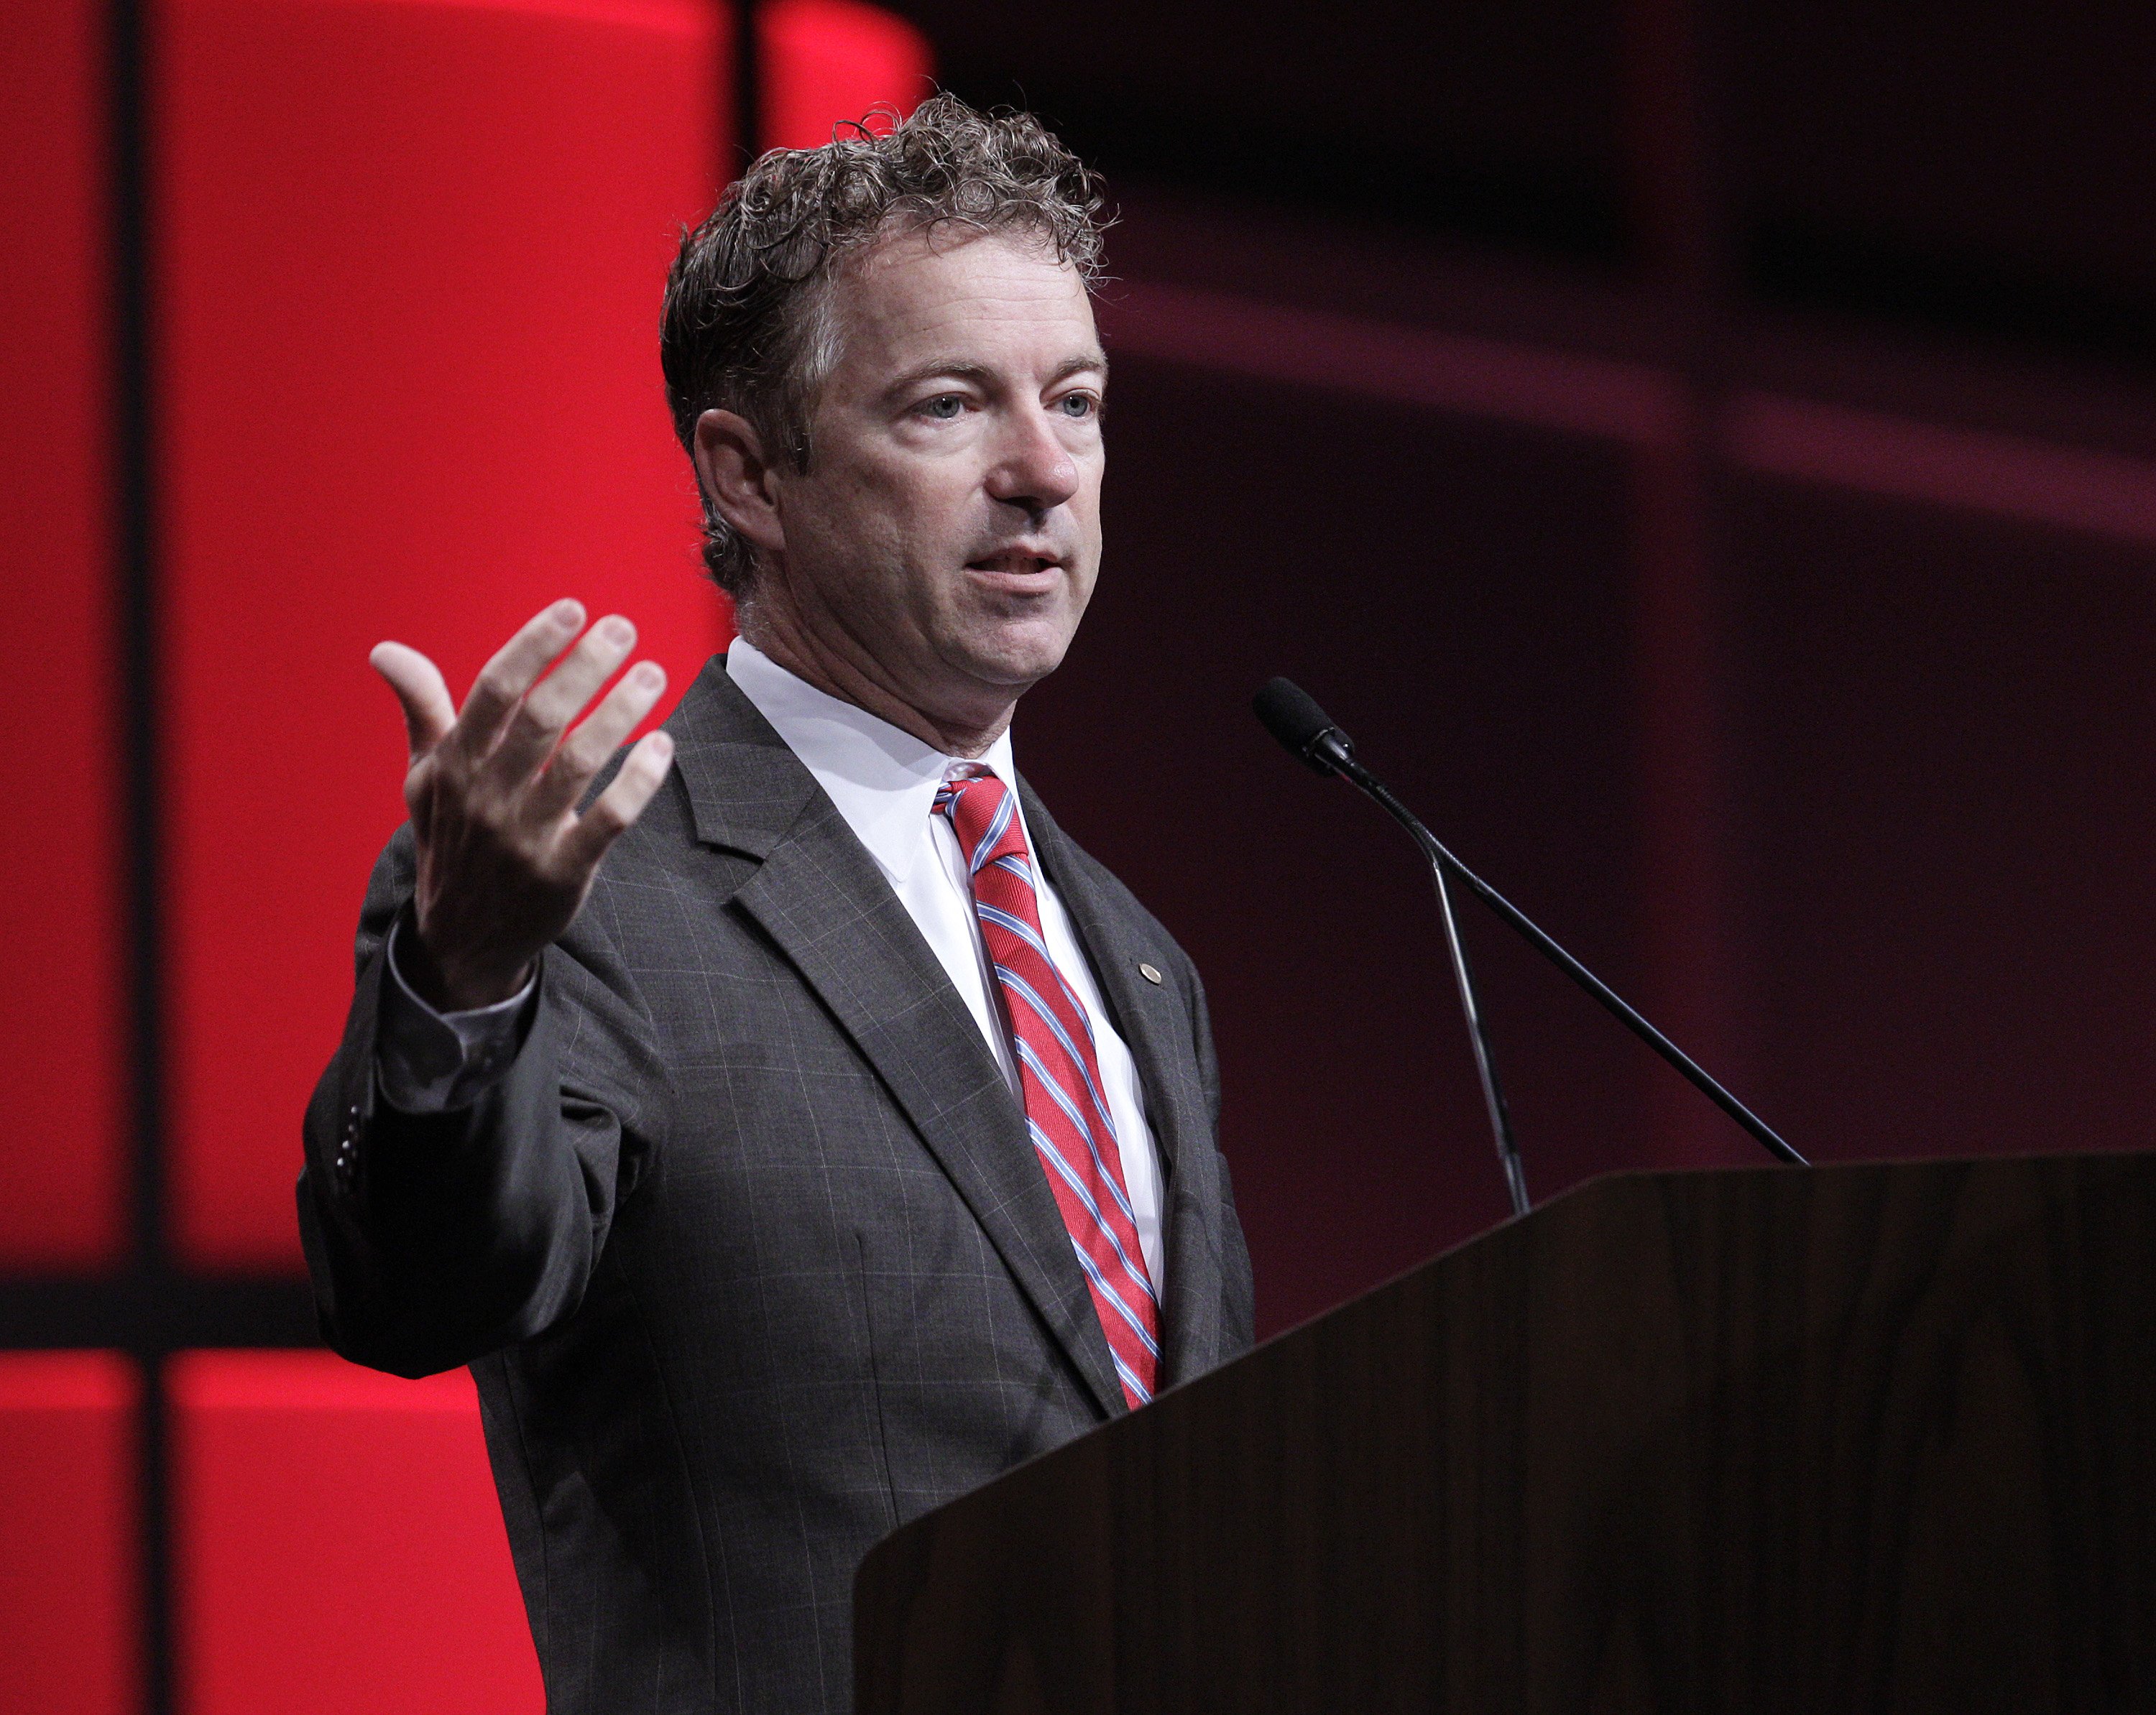 Senator Rand Paul (R-KY) speaks at the 2014 National Urban League Conference July 25, 2014 in Cincinnati, Ohio. (Jay LaPrete—Getty Images)